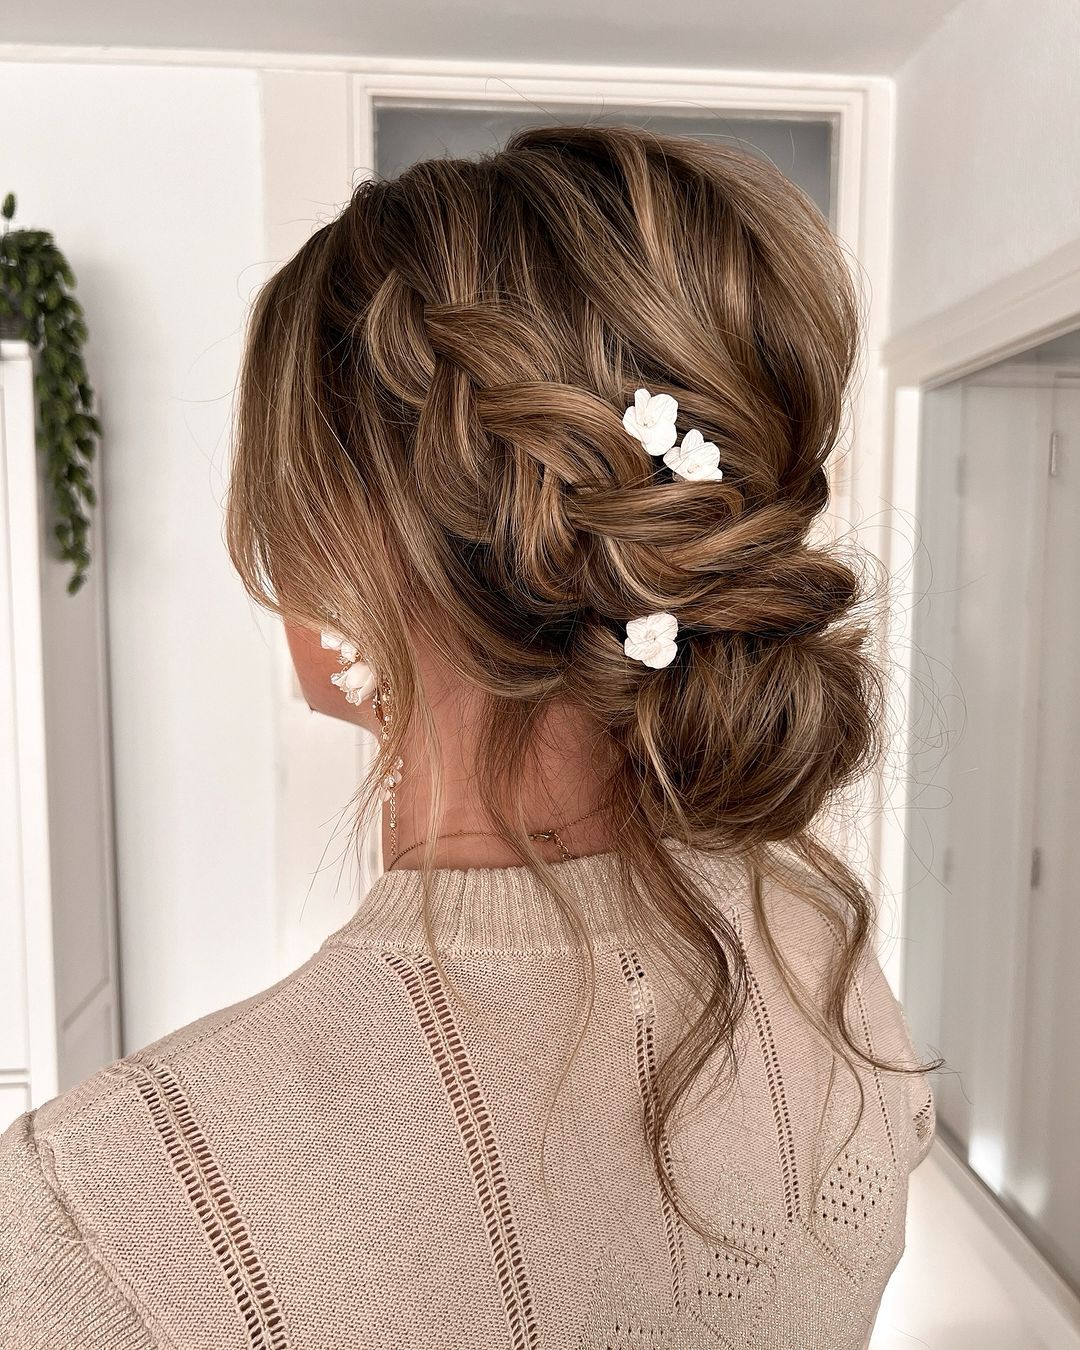 Twisted updo loose curls from absolutely.ineke .hairstyling